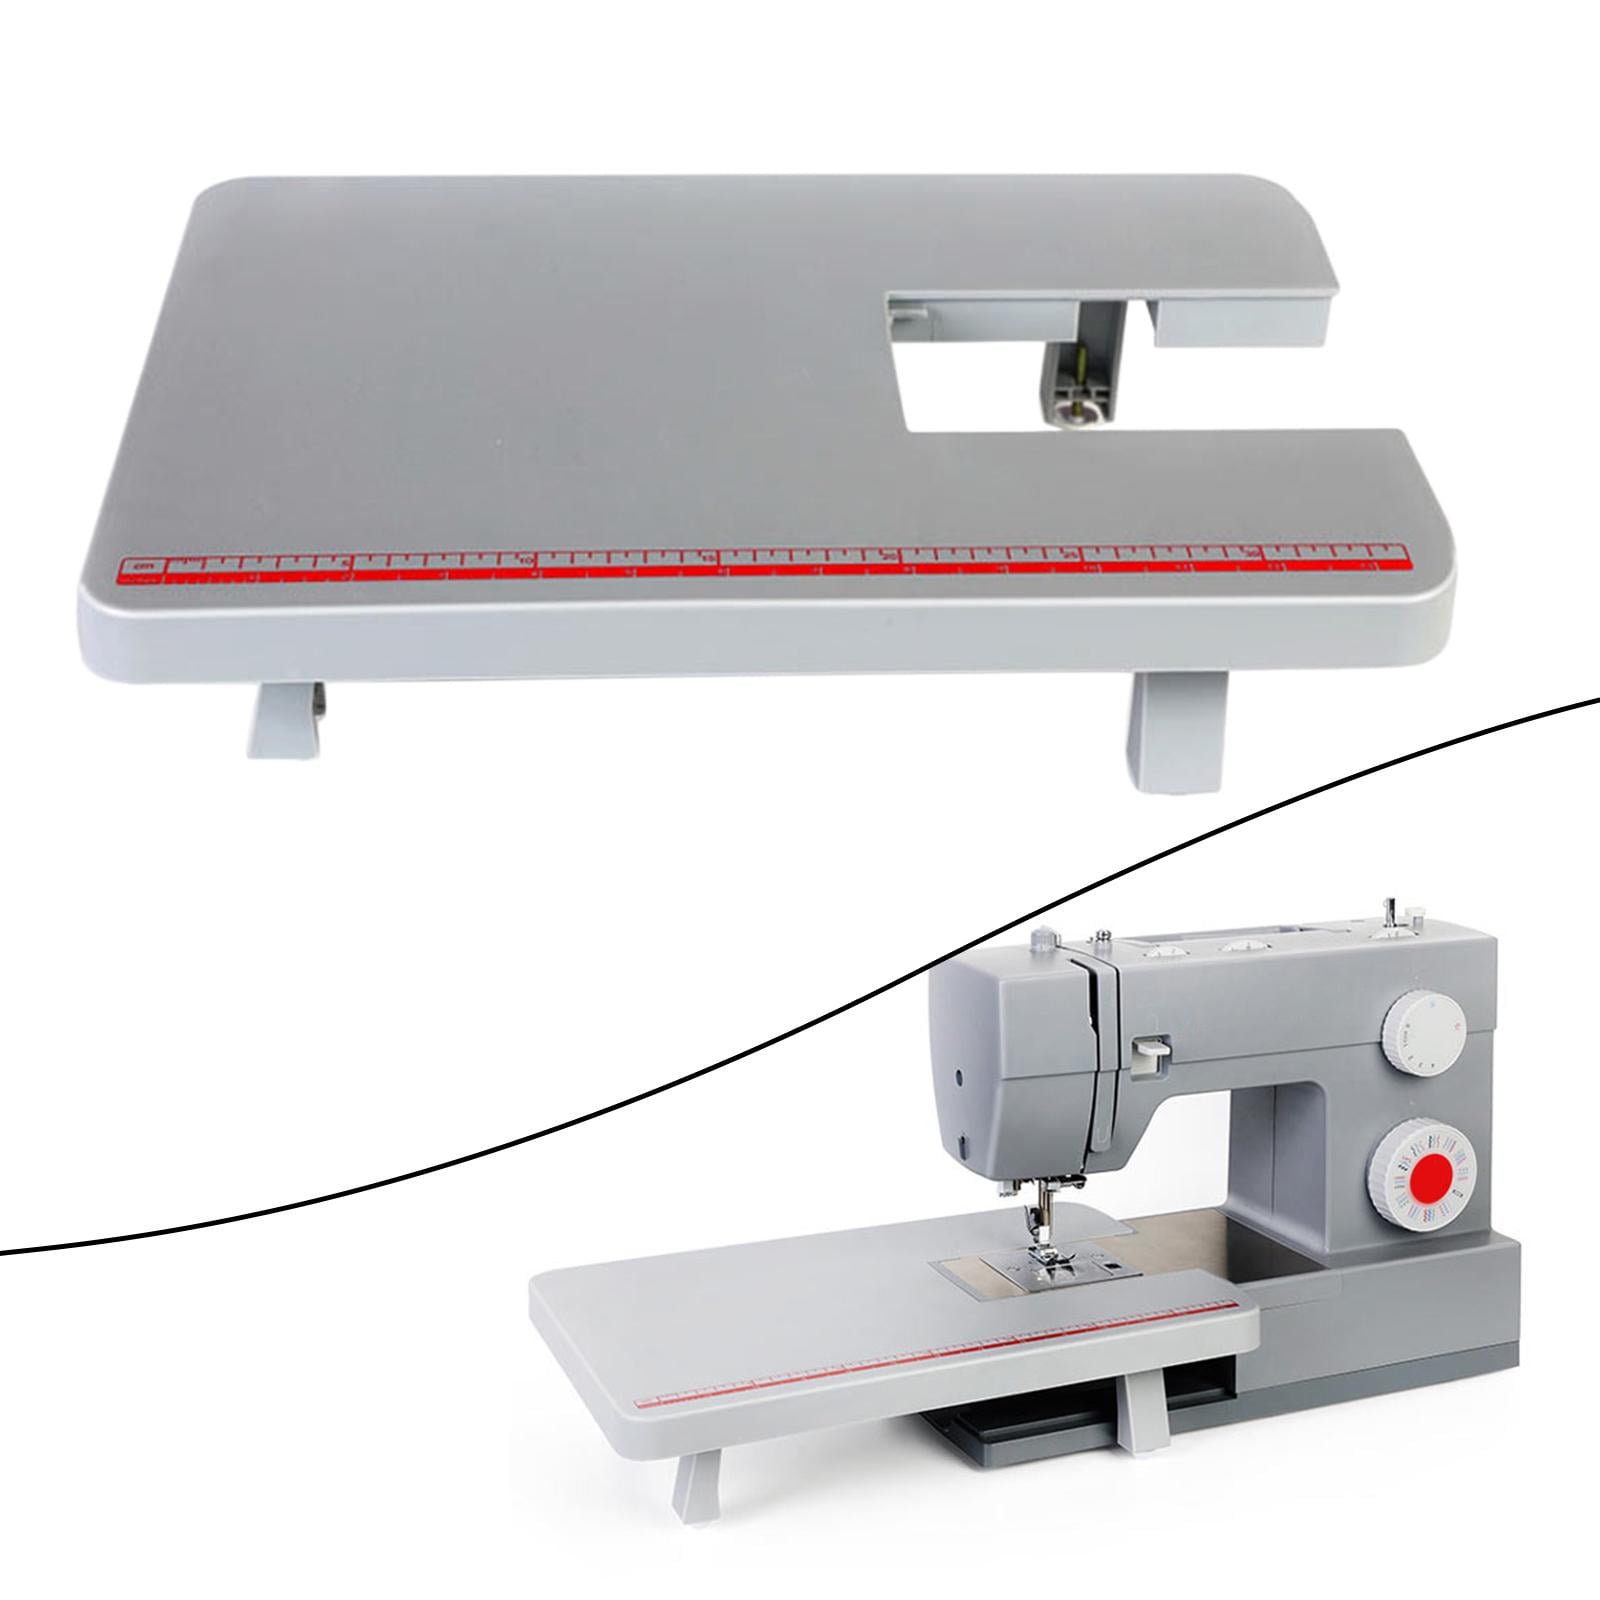 StitchTech Sewing Machines Extension Table Compatible with Singer Brand  44S, 4411, 4423, 4432, 4452, 5511, 5523, 5532, 6335 Heavy Duty Sewing  Machines